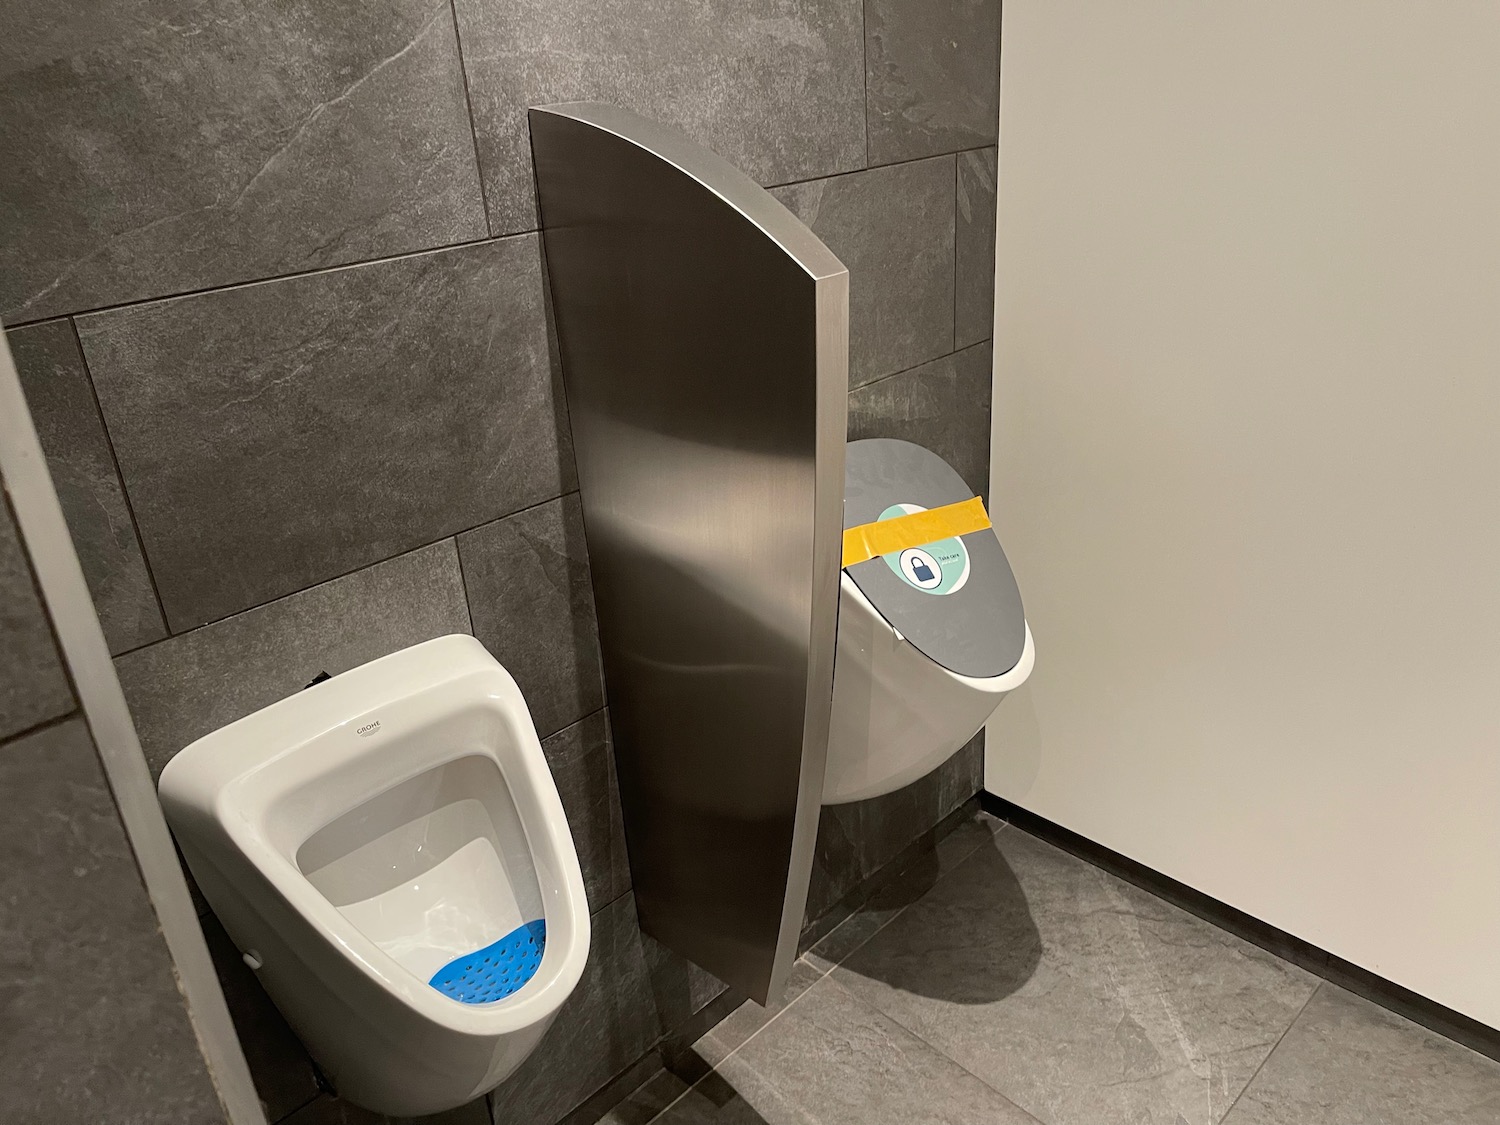 a urinal with a cartoon face on it